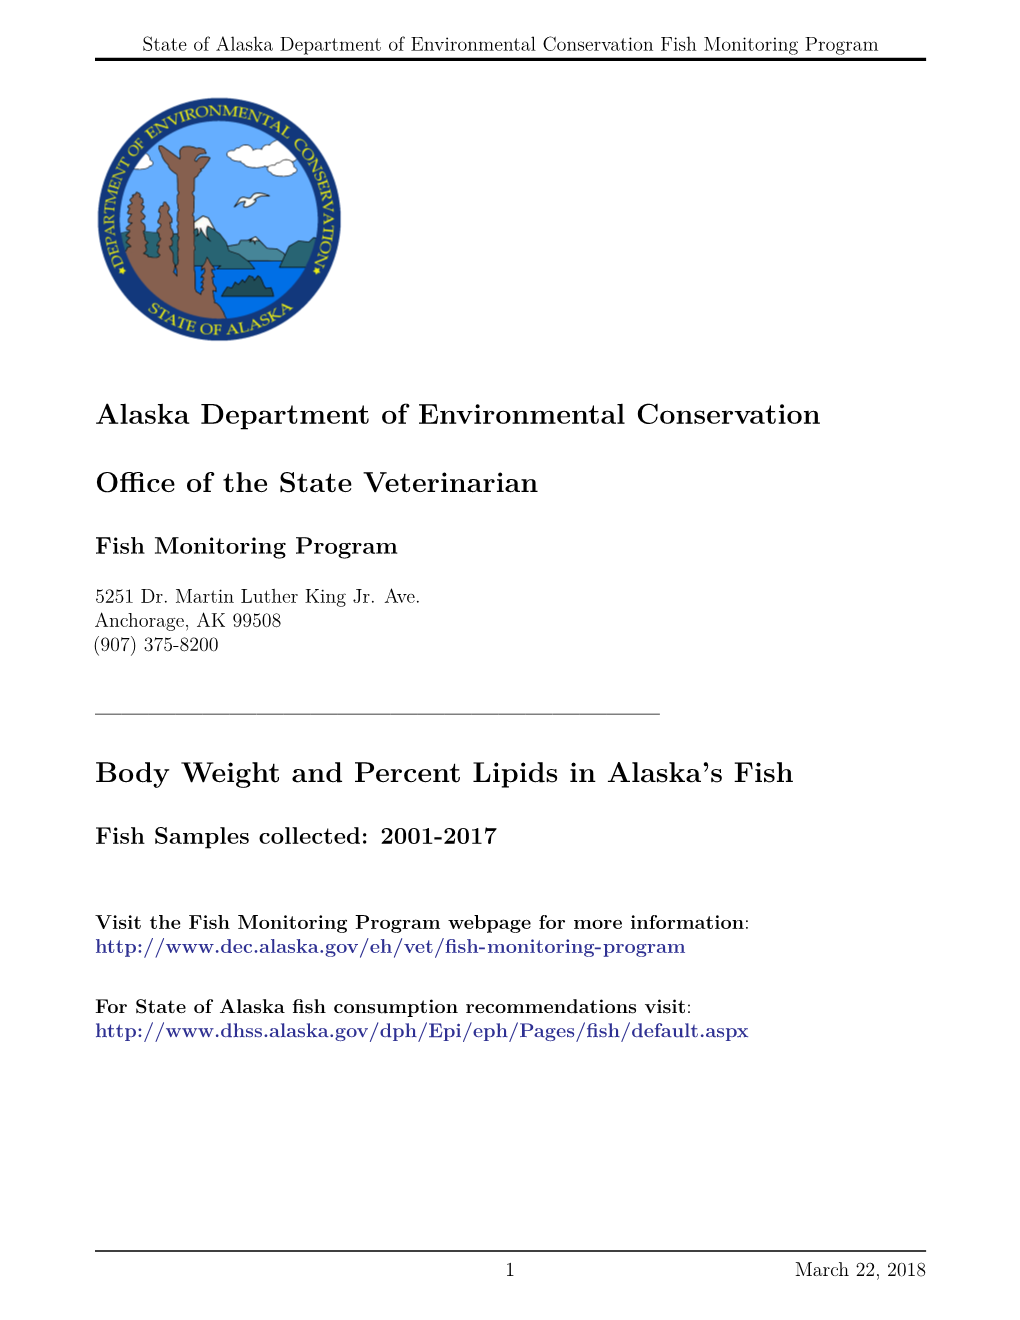 Alaska Department of Environmental Conservation Office of the State